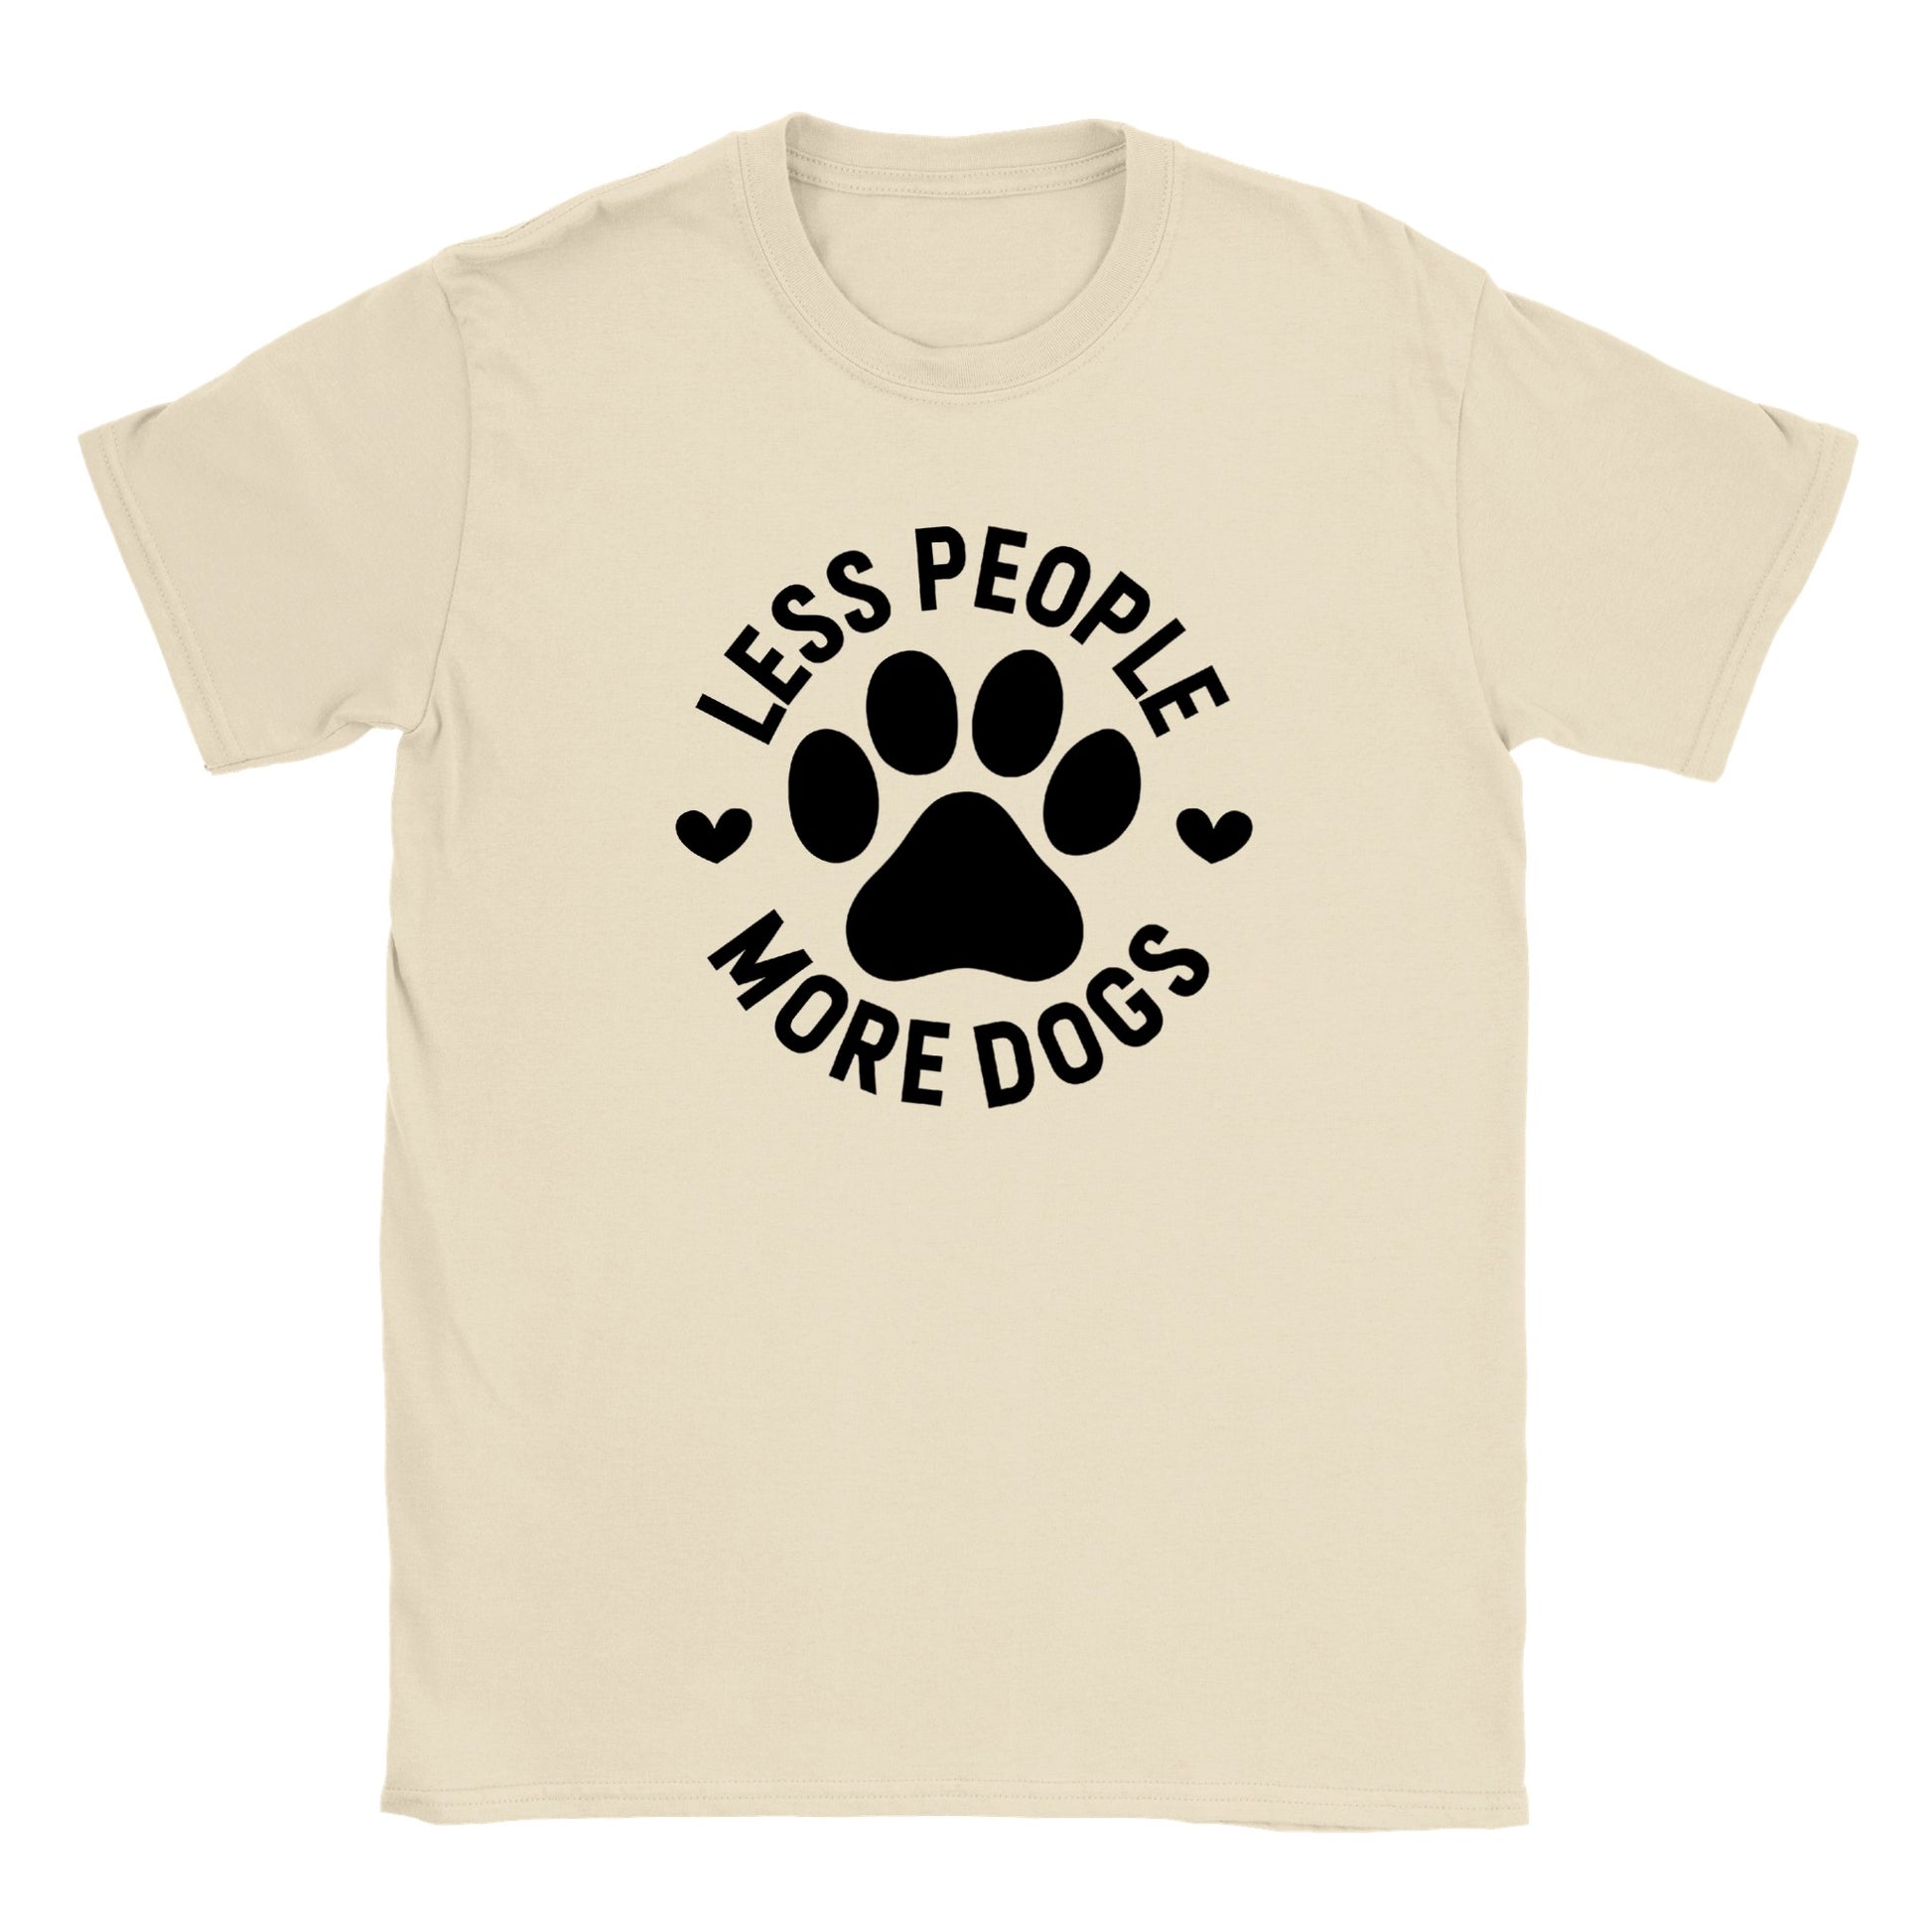 Less People More Dogs - Classic Unisex Crewneck T-shirt - Mister Snarky's